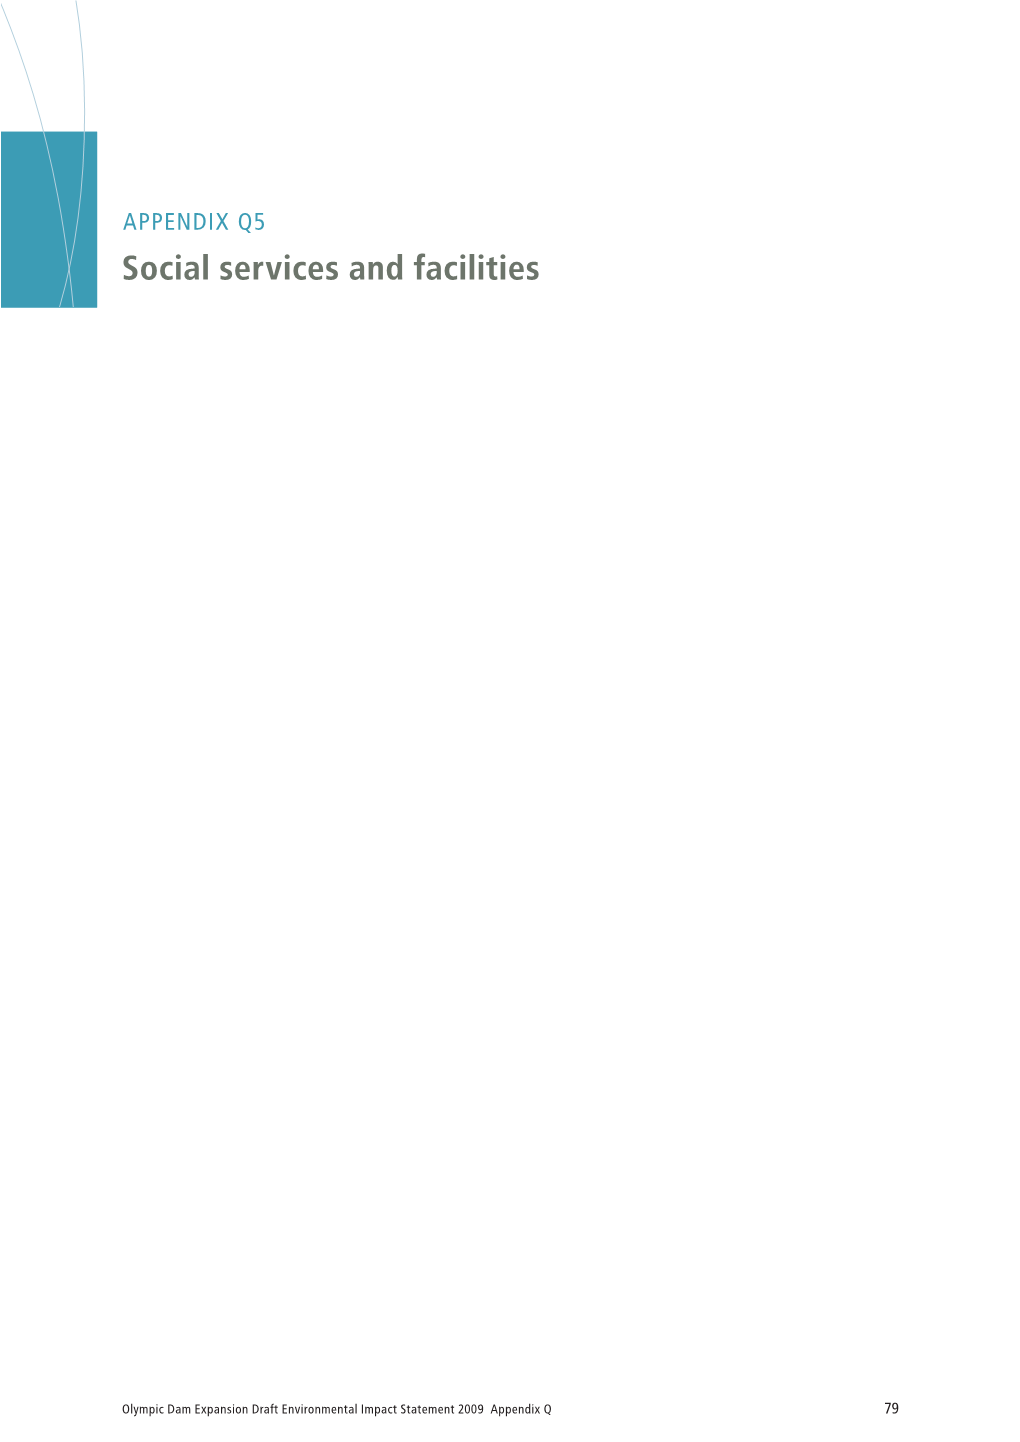 Social Services and Facilities